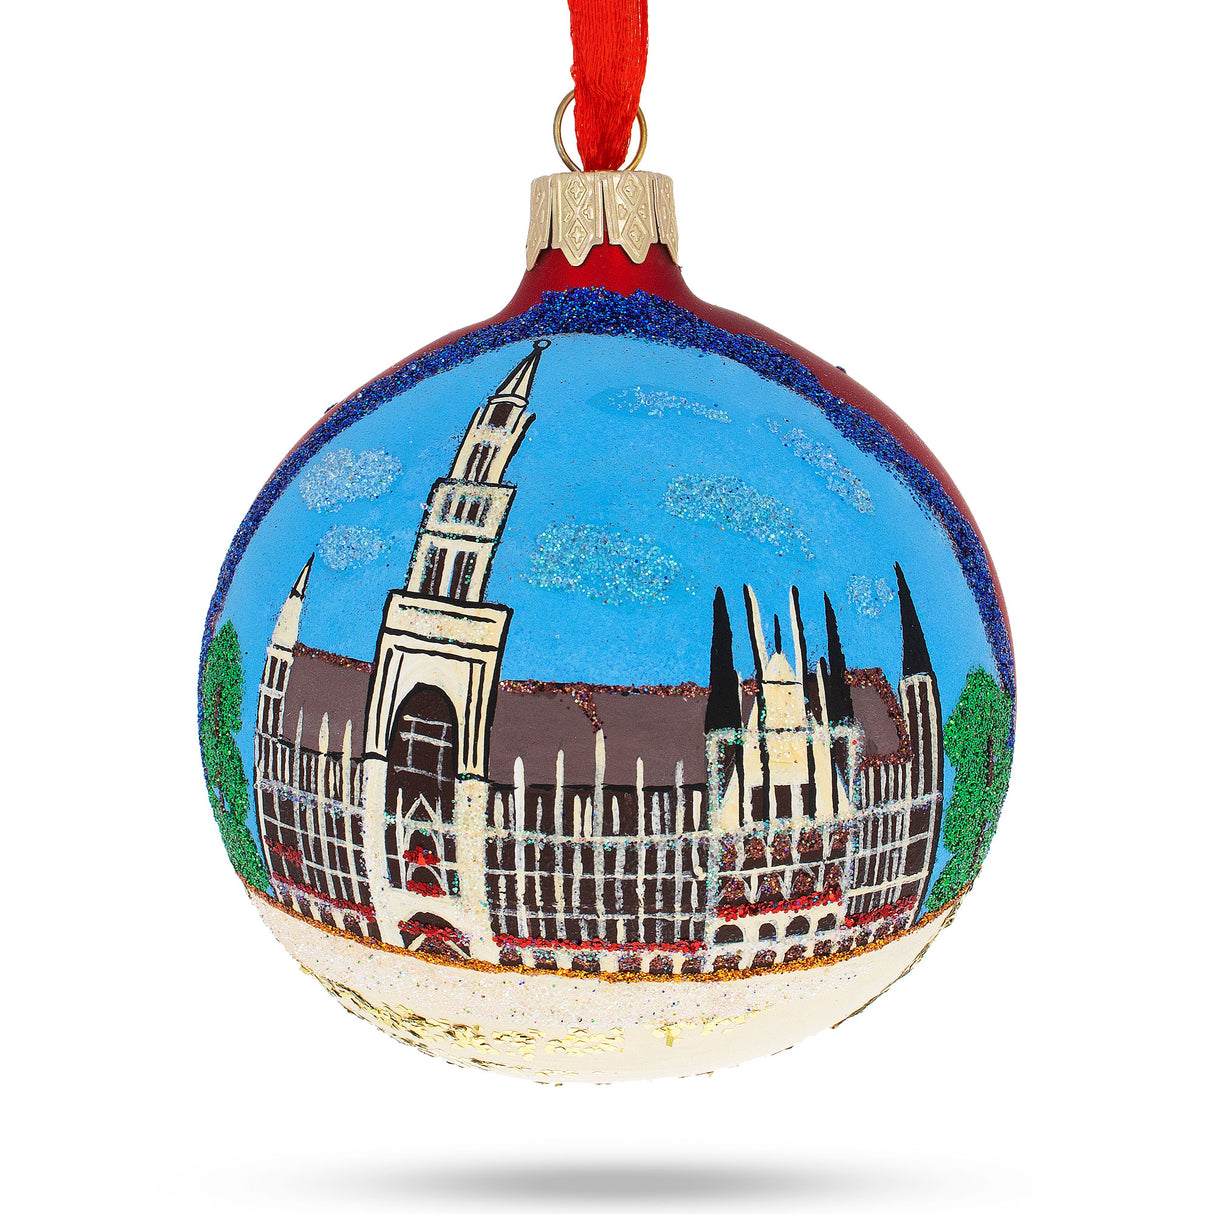 Marienplatz in Munich, Germany Glass Ball Christmas Ornament 3.25 Inches in Multi color, Round shape